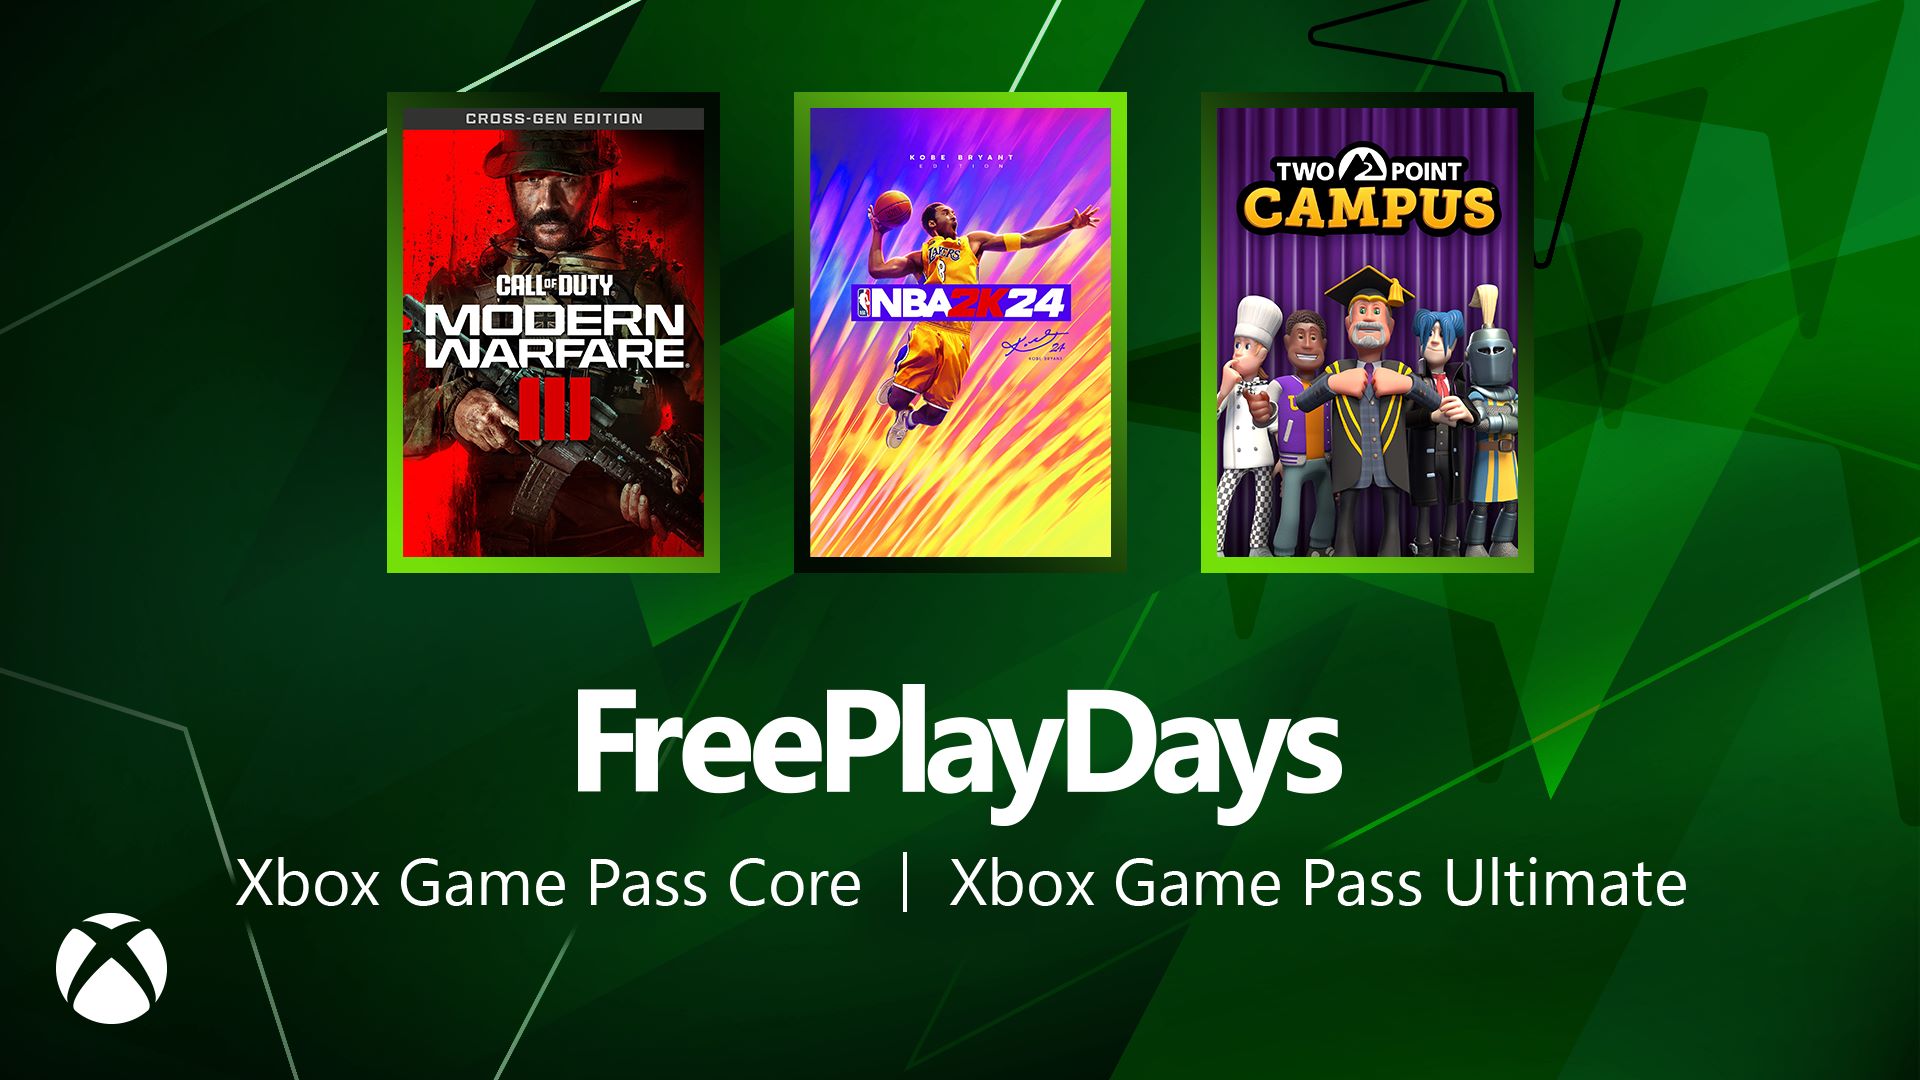 Free Play Days – Call of Duty Modern Warfare III (Multiplayer/Zombies uniquement), NBA 2k24 et Two Point Campus